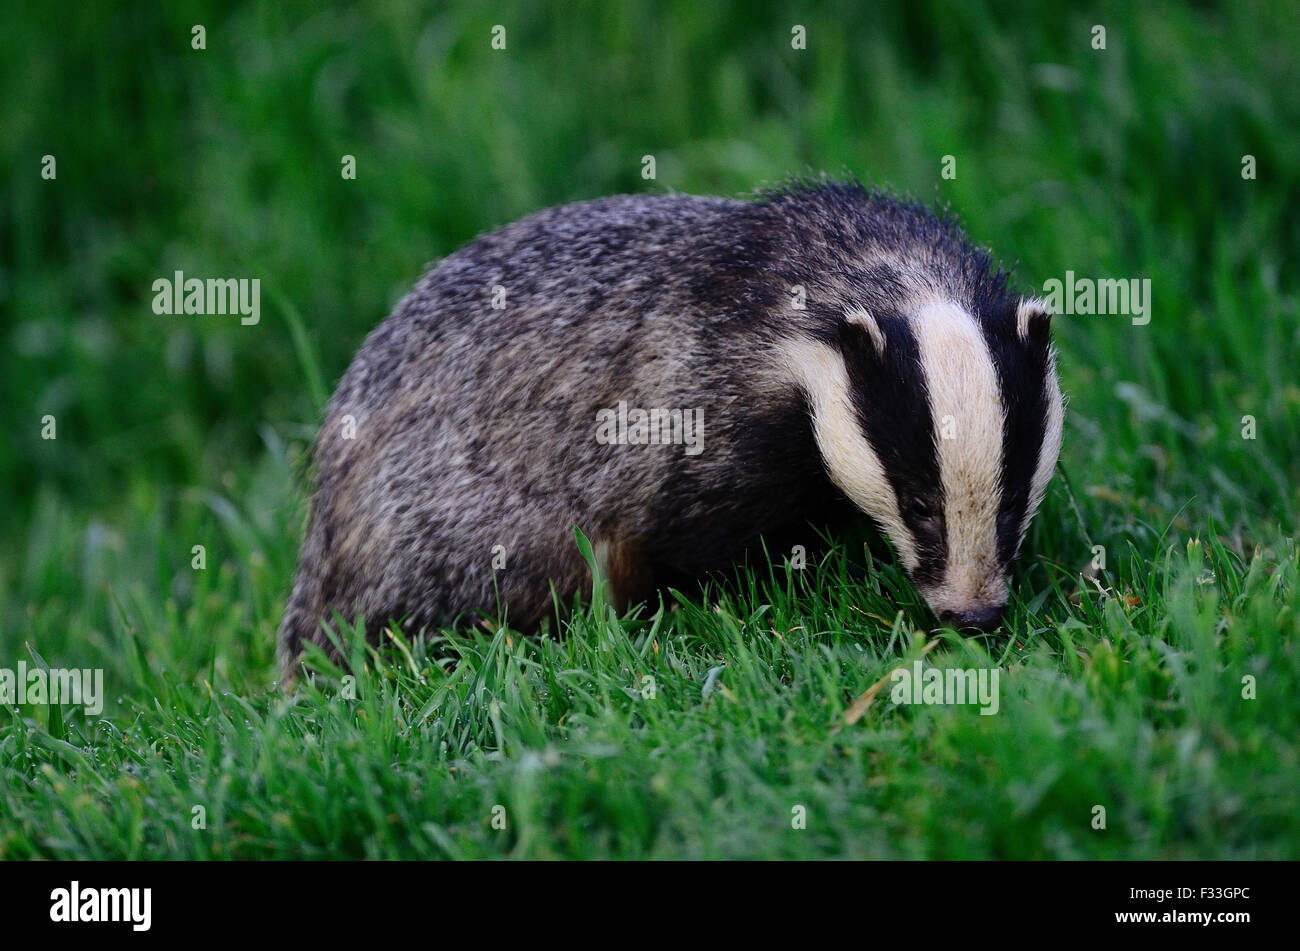 A badger feeding in the grass UK Stock Photo